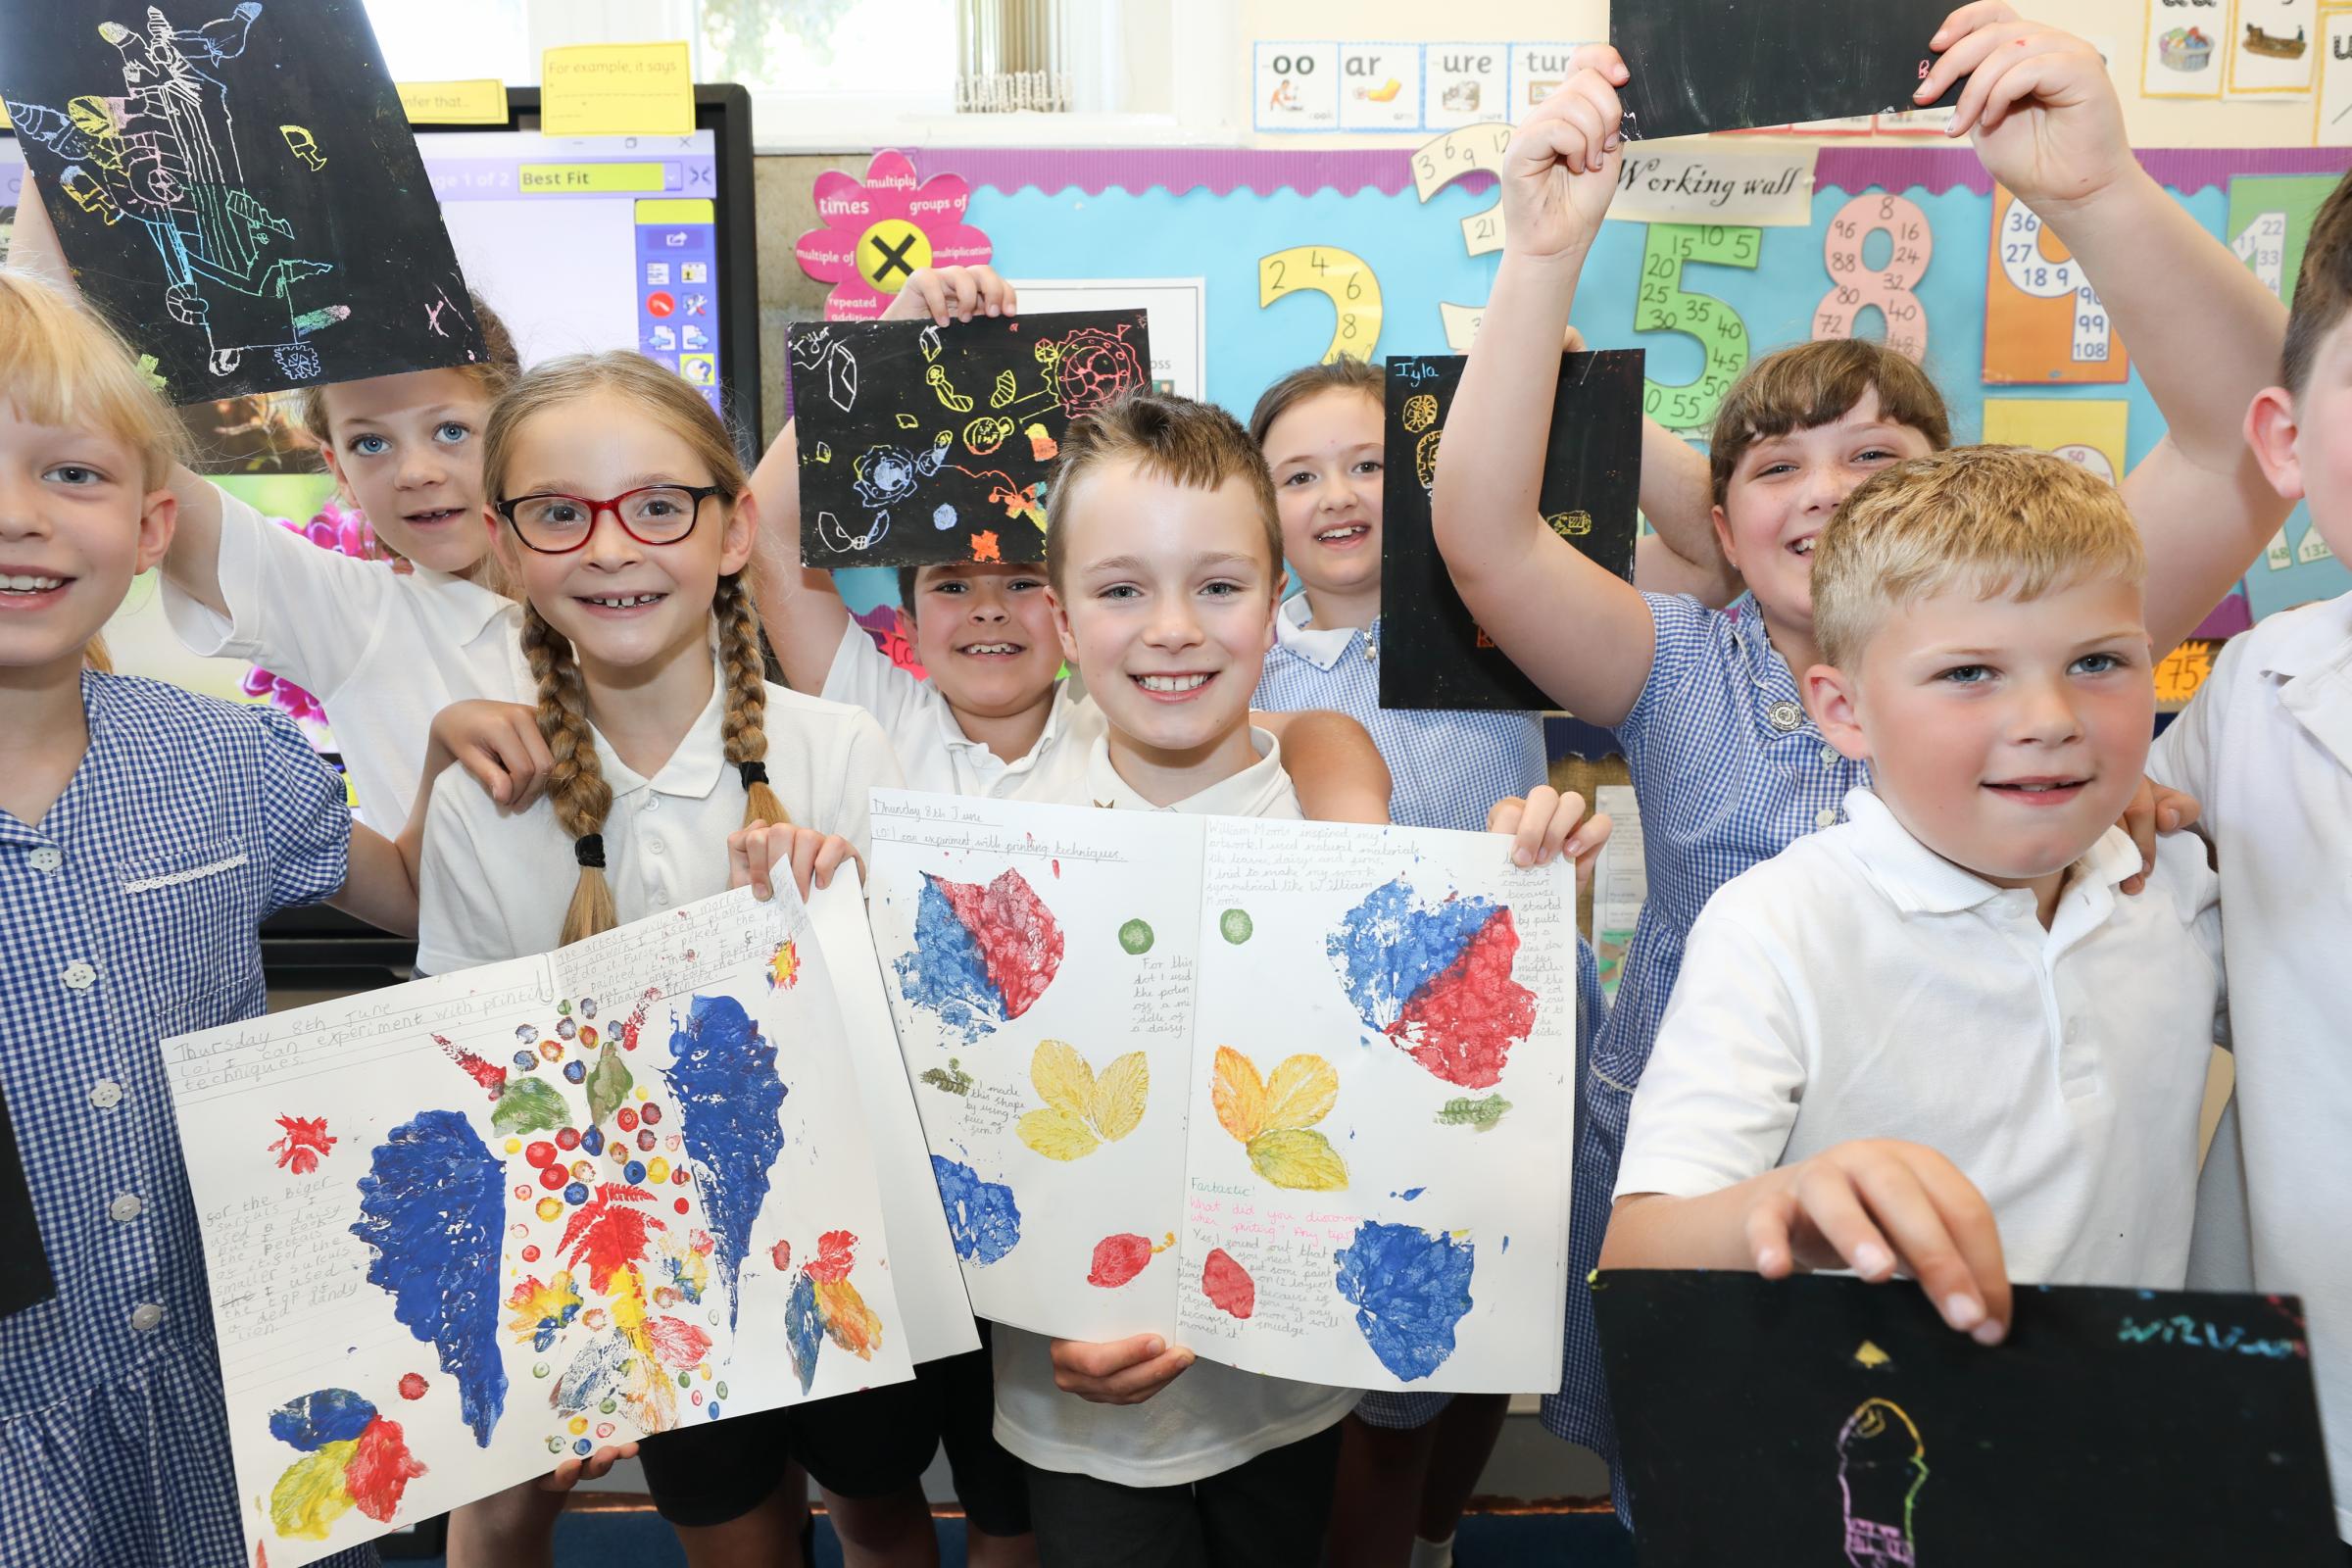 Pupils from Willow class show their printing techniques and scratch artwork.